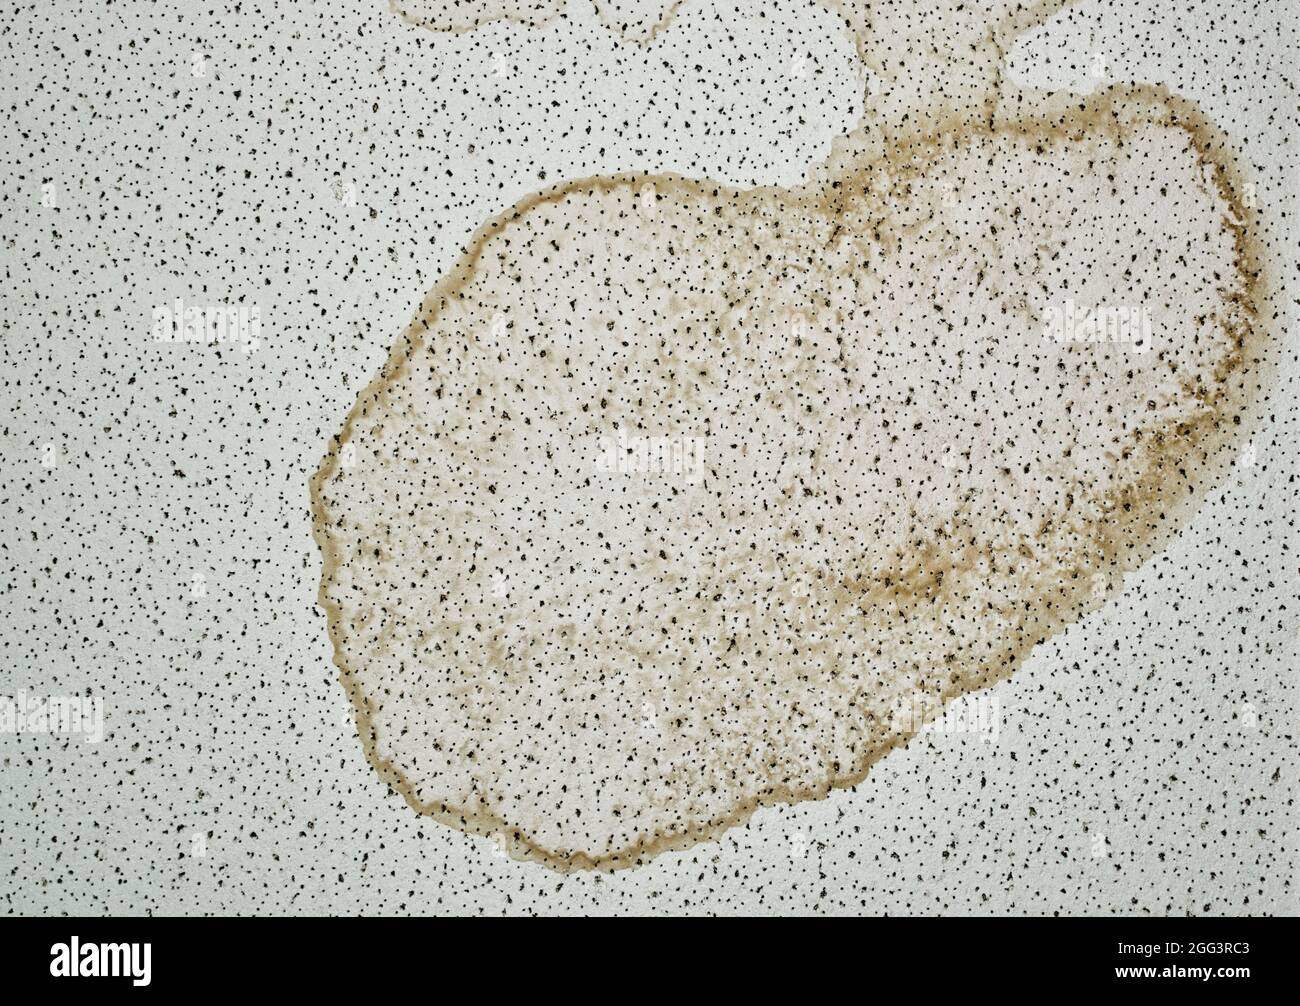 Dried water stain from a ceiling leak from a rain storm inside a commercial building. Stock Photo